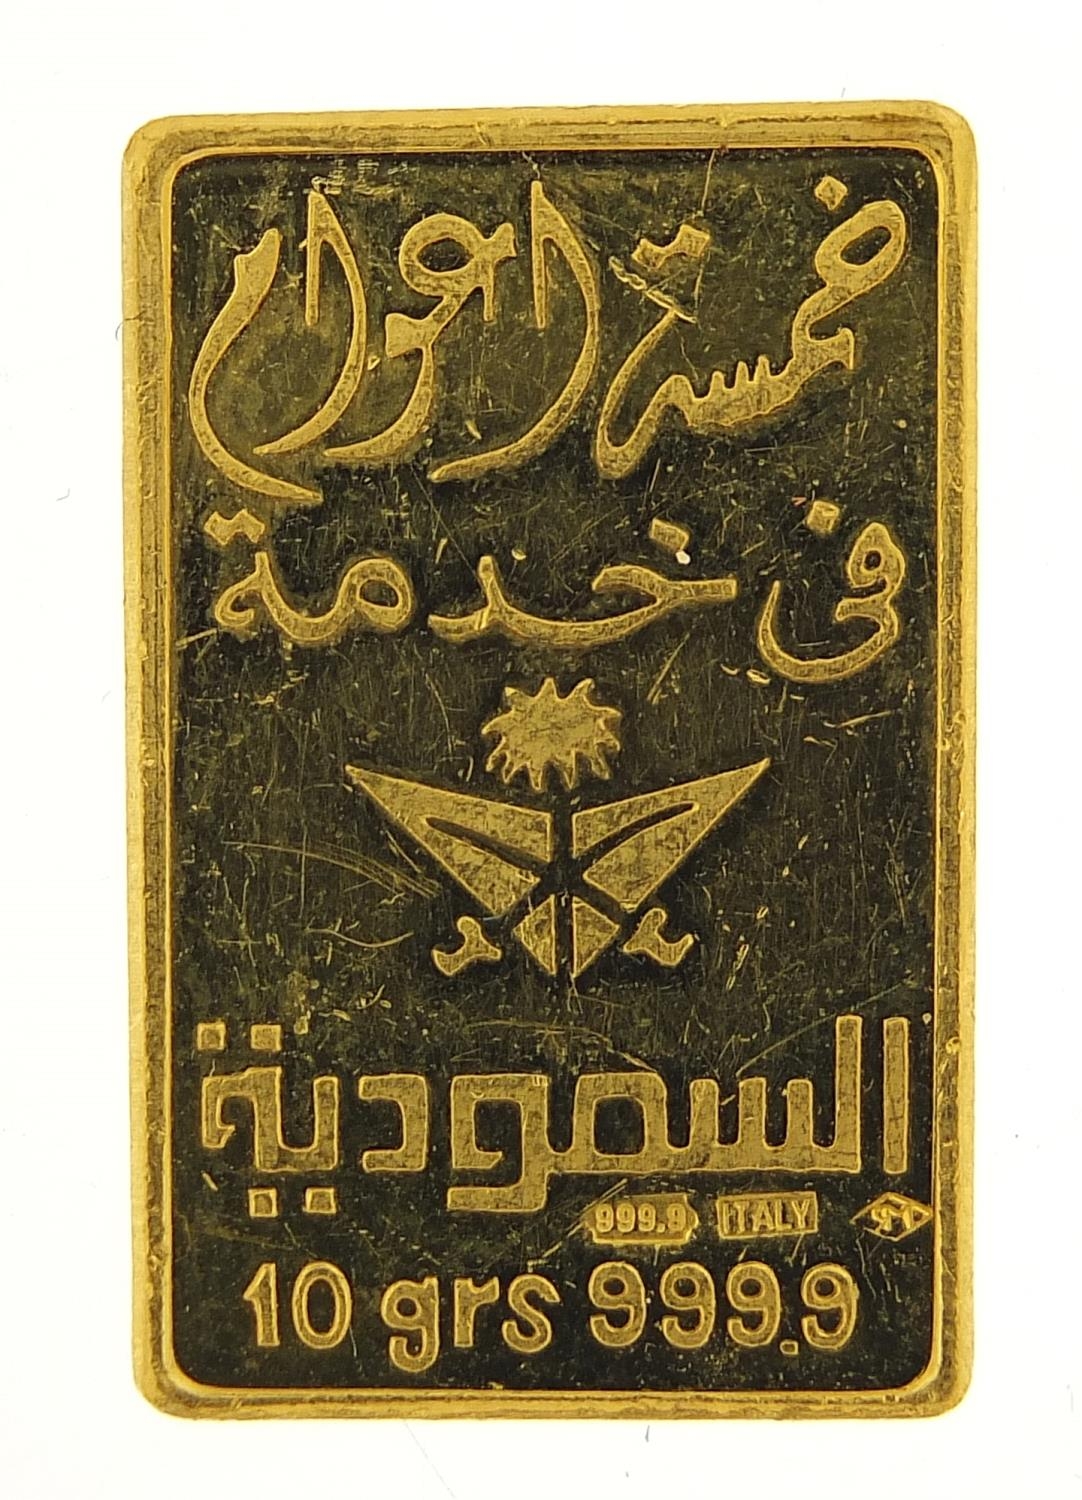 5 Years Service with Saudia 999.9 fine gold 10g ingot - this lot is sold without buyer?s premium, - Image 2 of 3